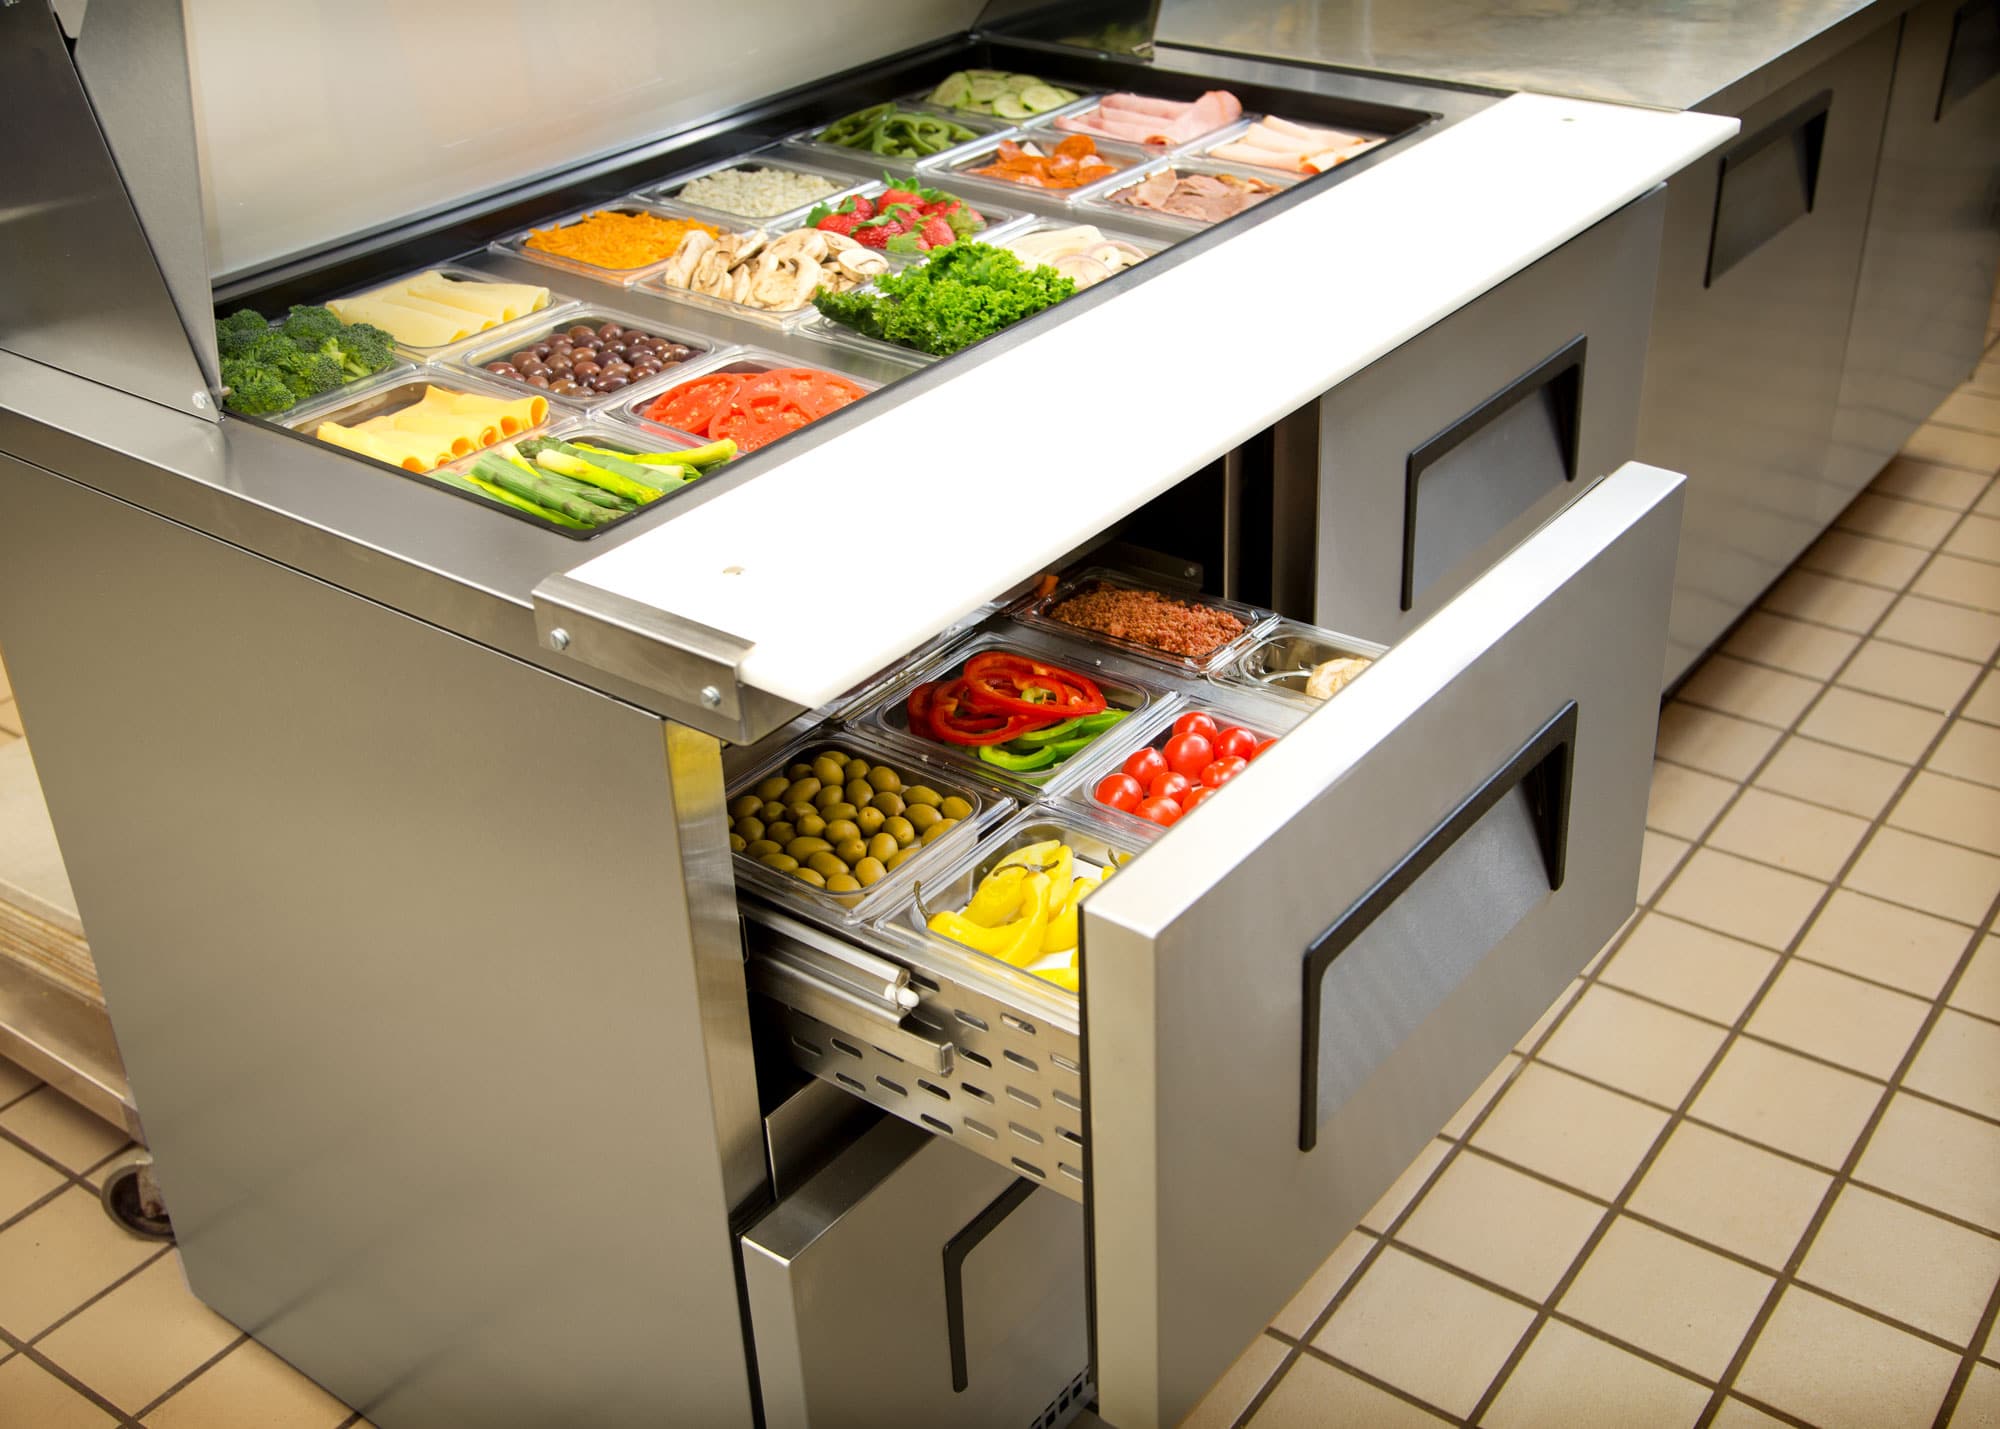 True Manufacturing is Improving Refrigeration